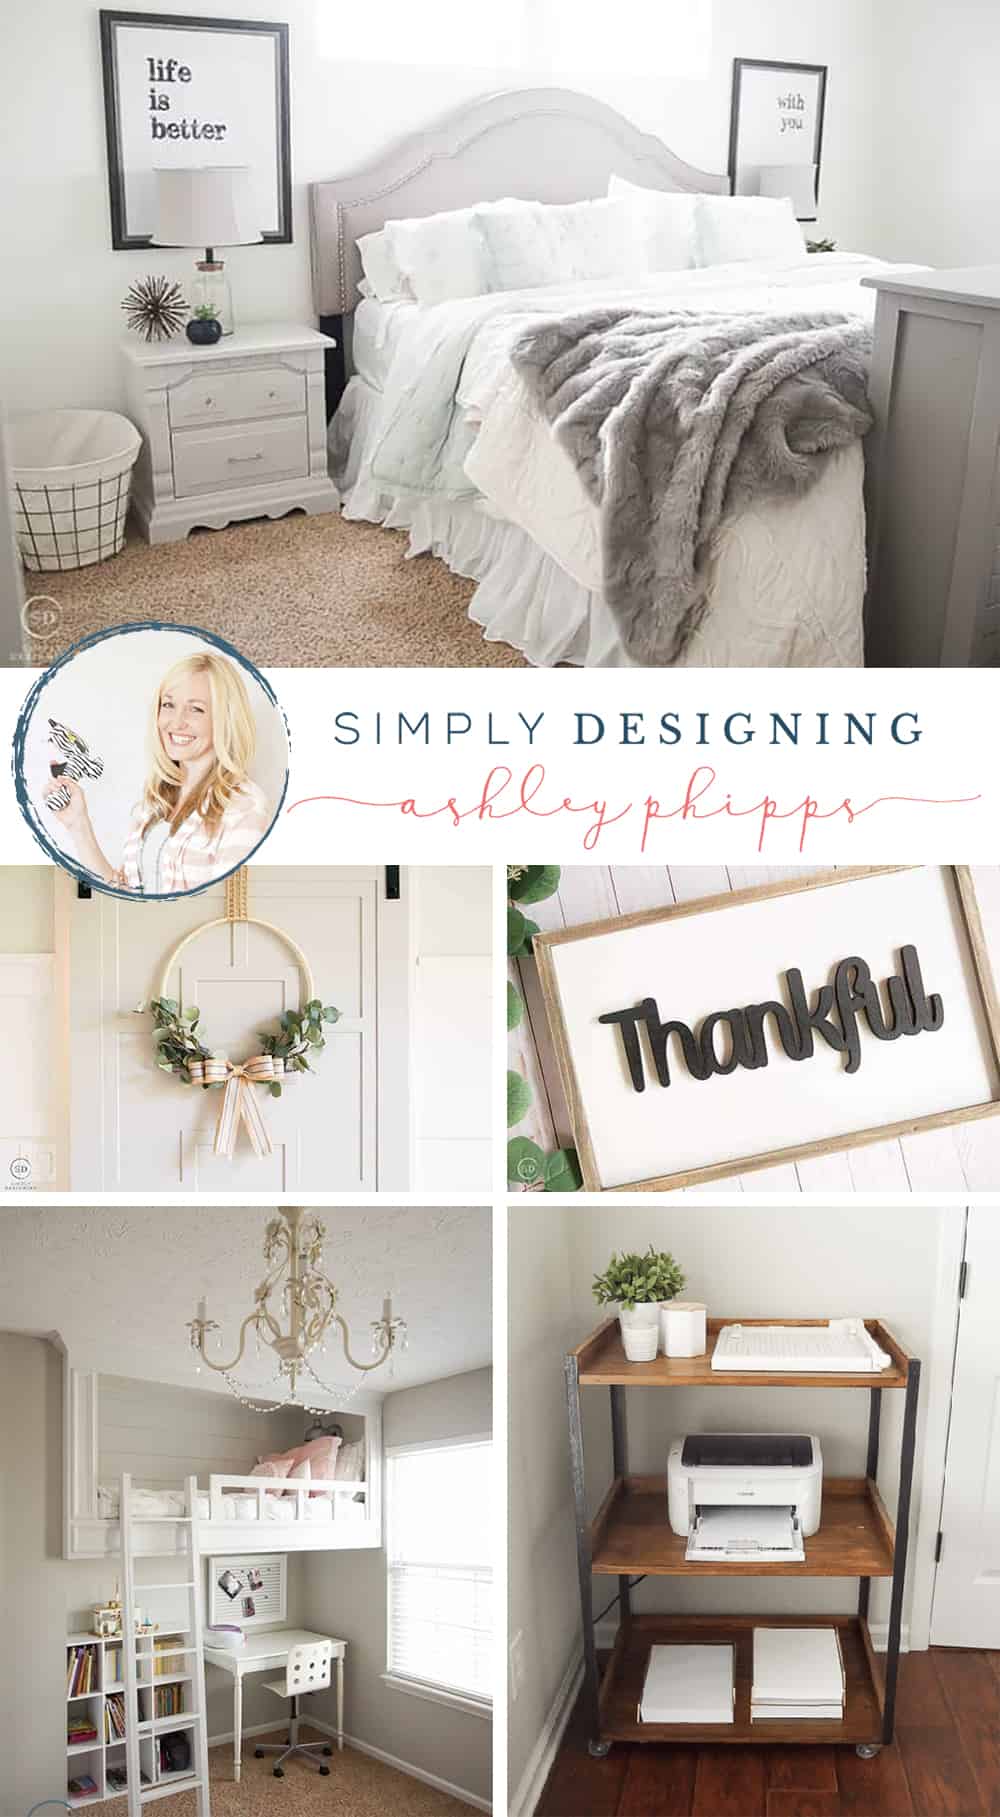 SimplyDesigning AshleyPhipps | 45 Light Bright and Beautiful Home Inspiration Ideas | 18 | organize a closet